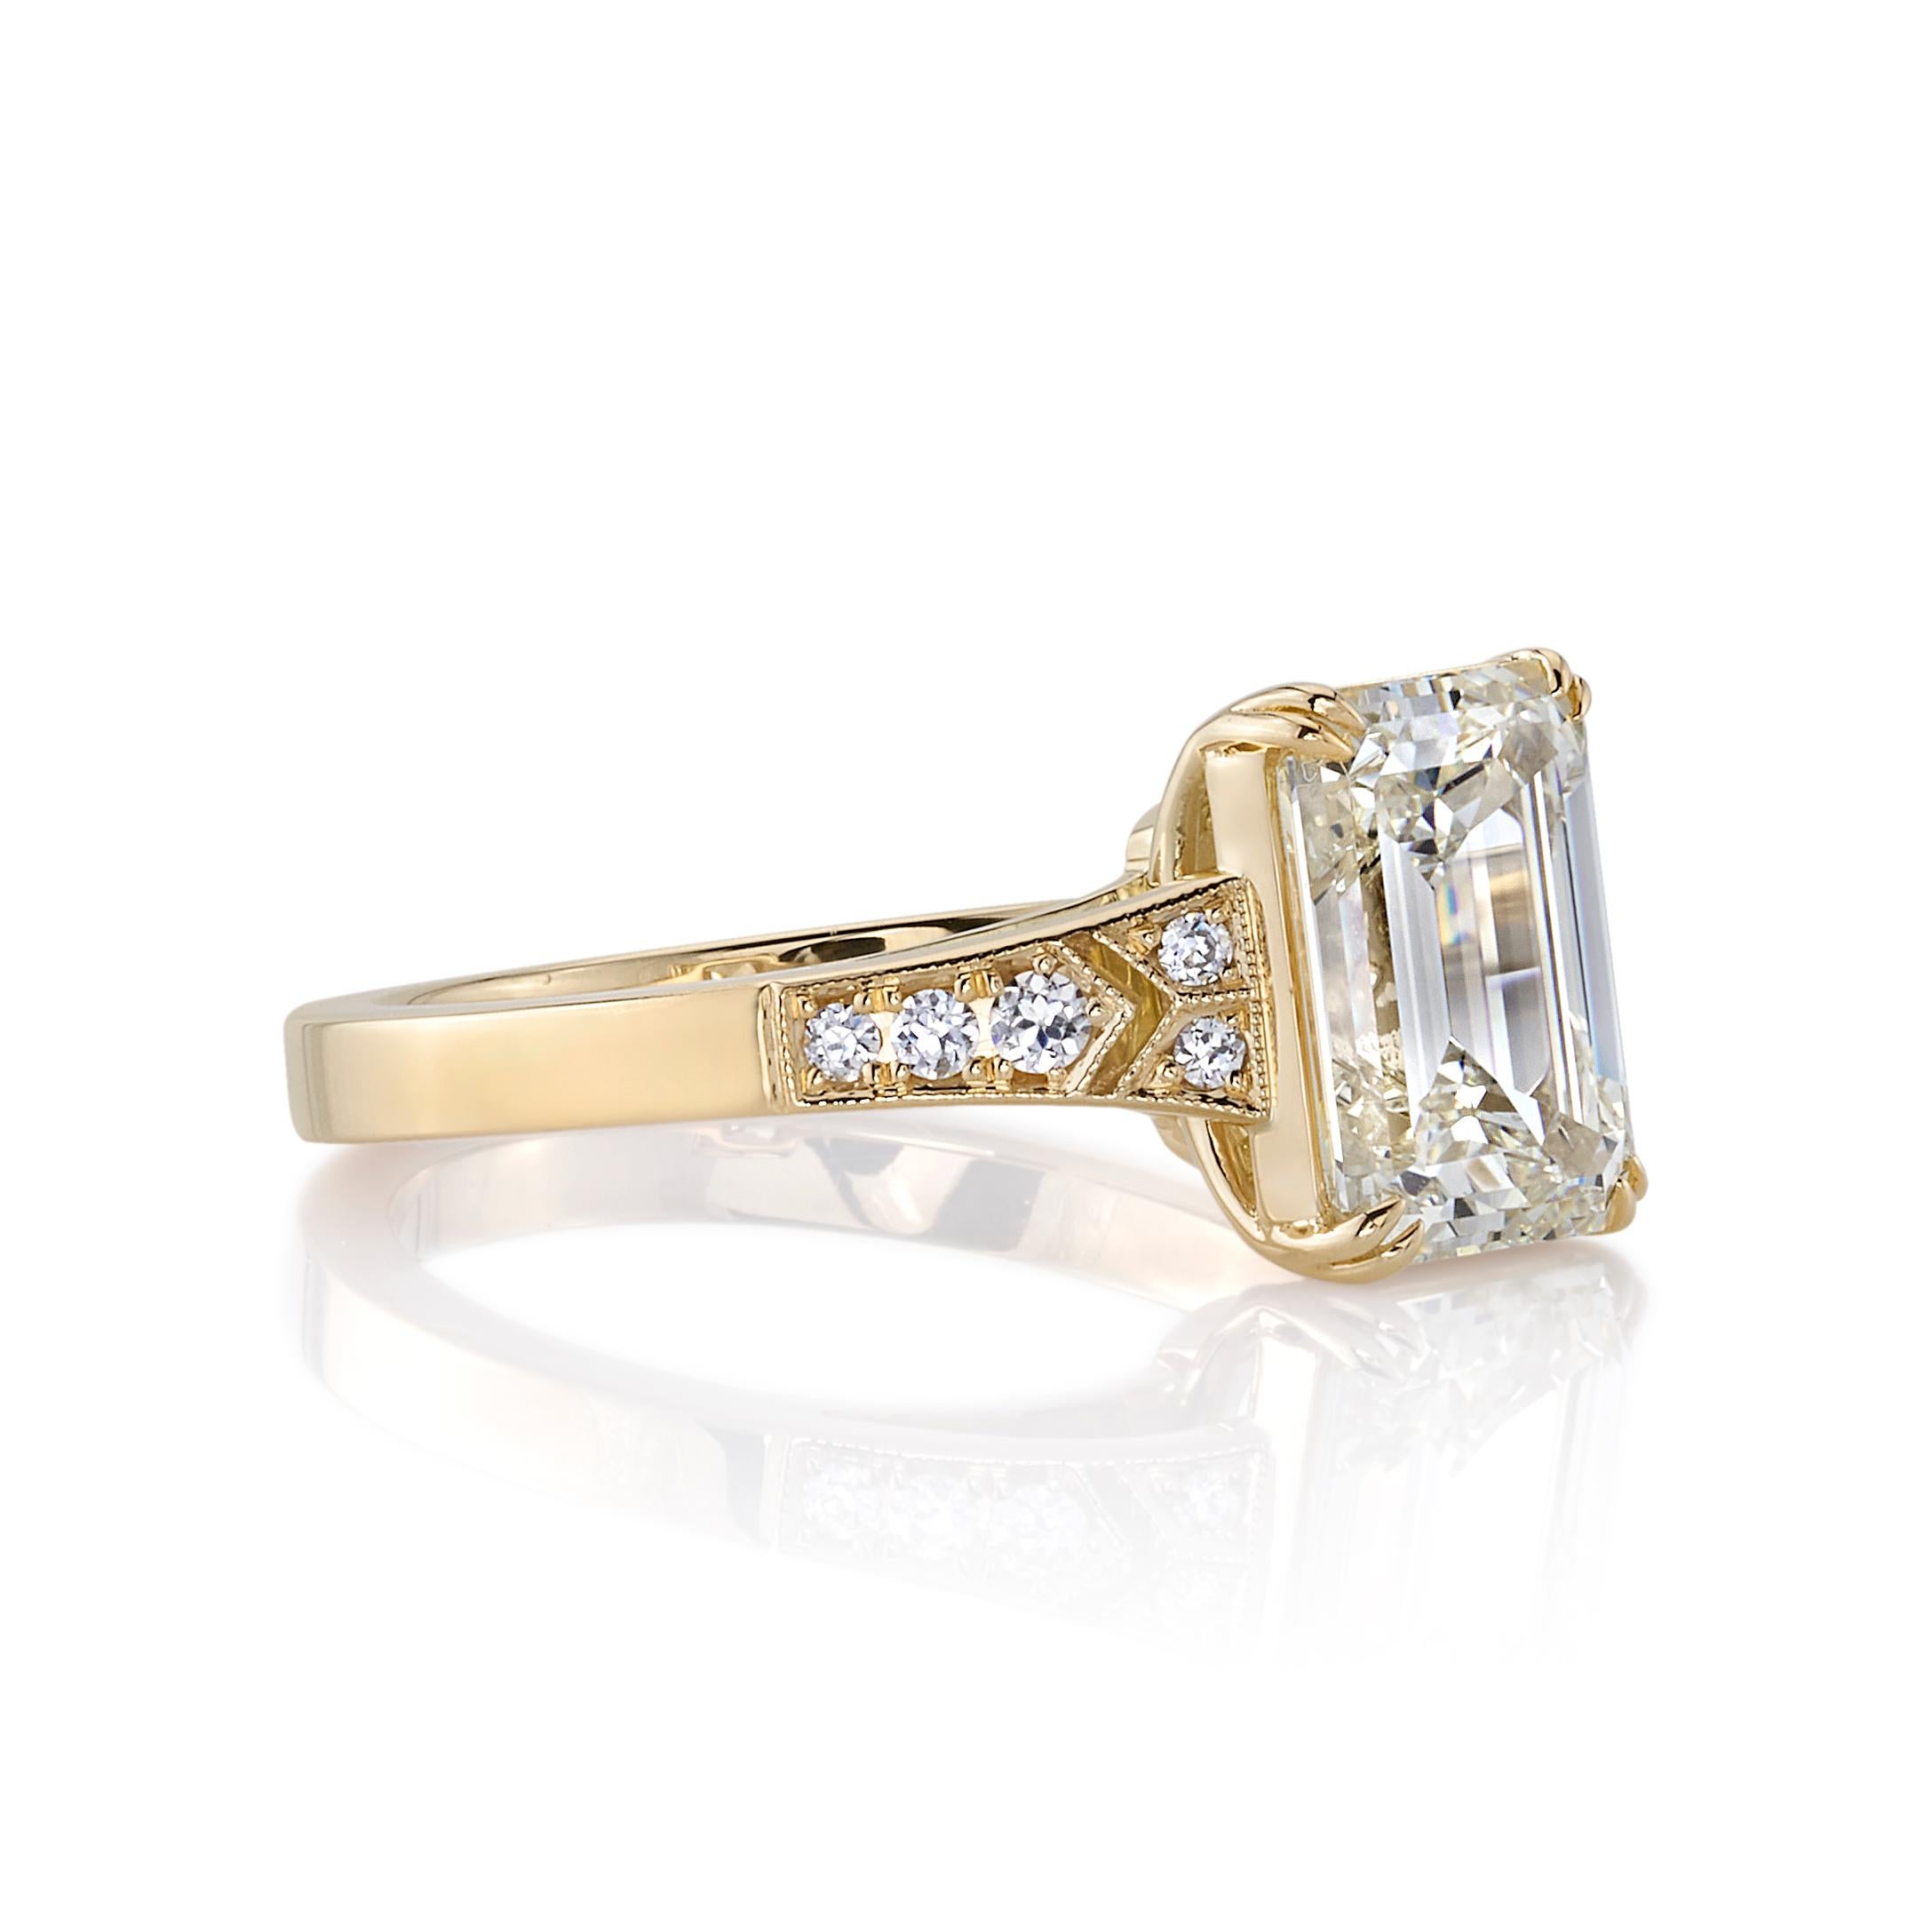 3.01ct U-V/VS1 GIA certified Emerald cut diamond with 0.10ctw old European cut accent diamonds set in a handcrafted 18K yellow gold mounting.

Ring is currently a size 6 and can be sized to fit. 

Our jewelry is made locally in Los Angeles and most